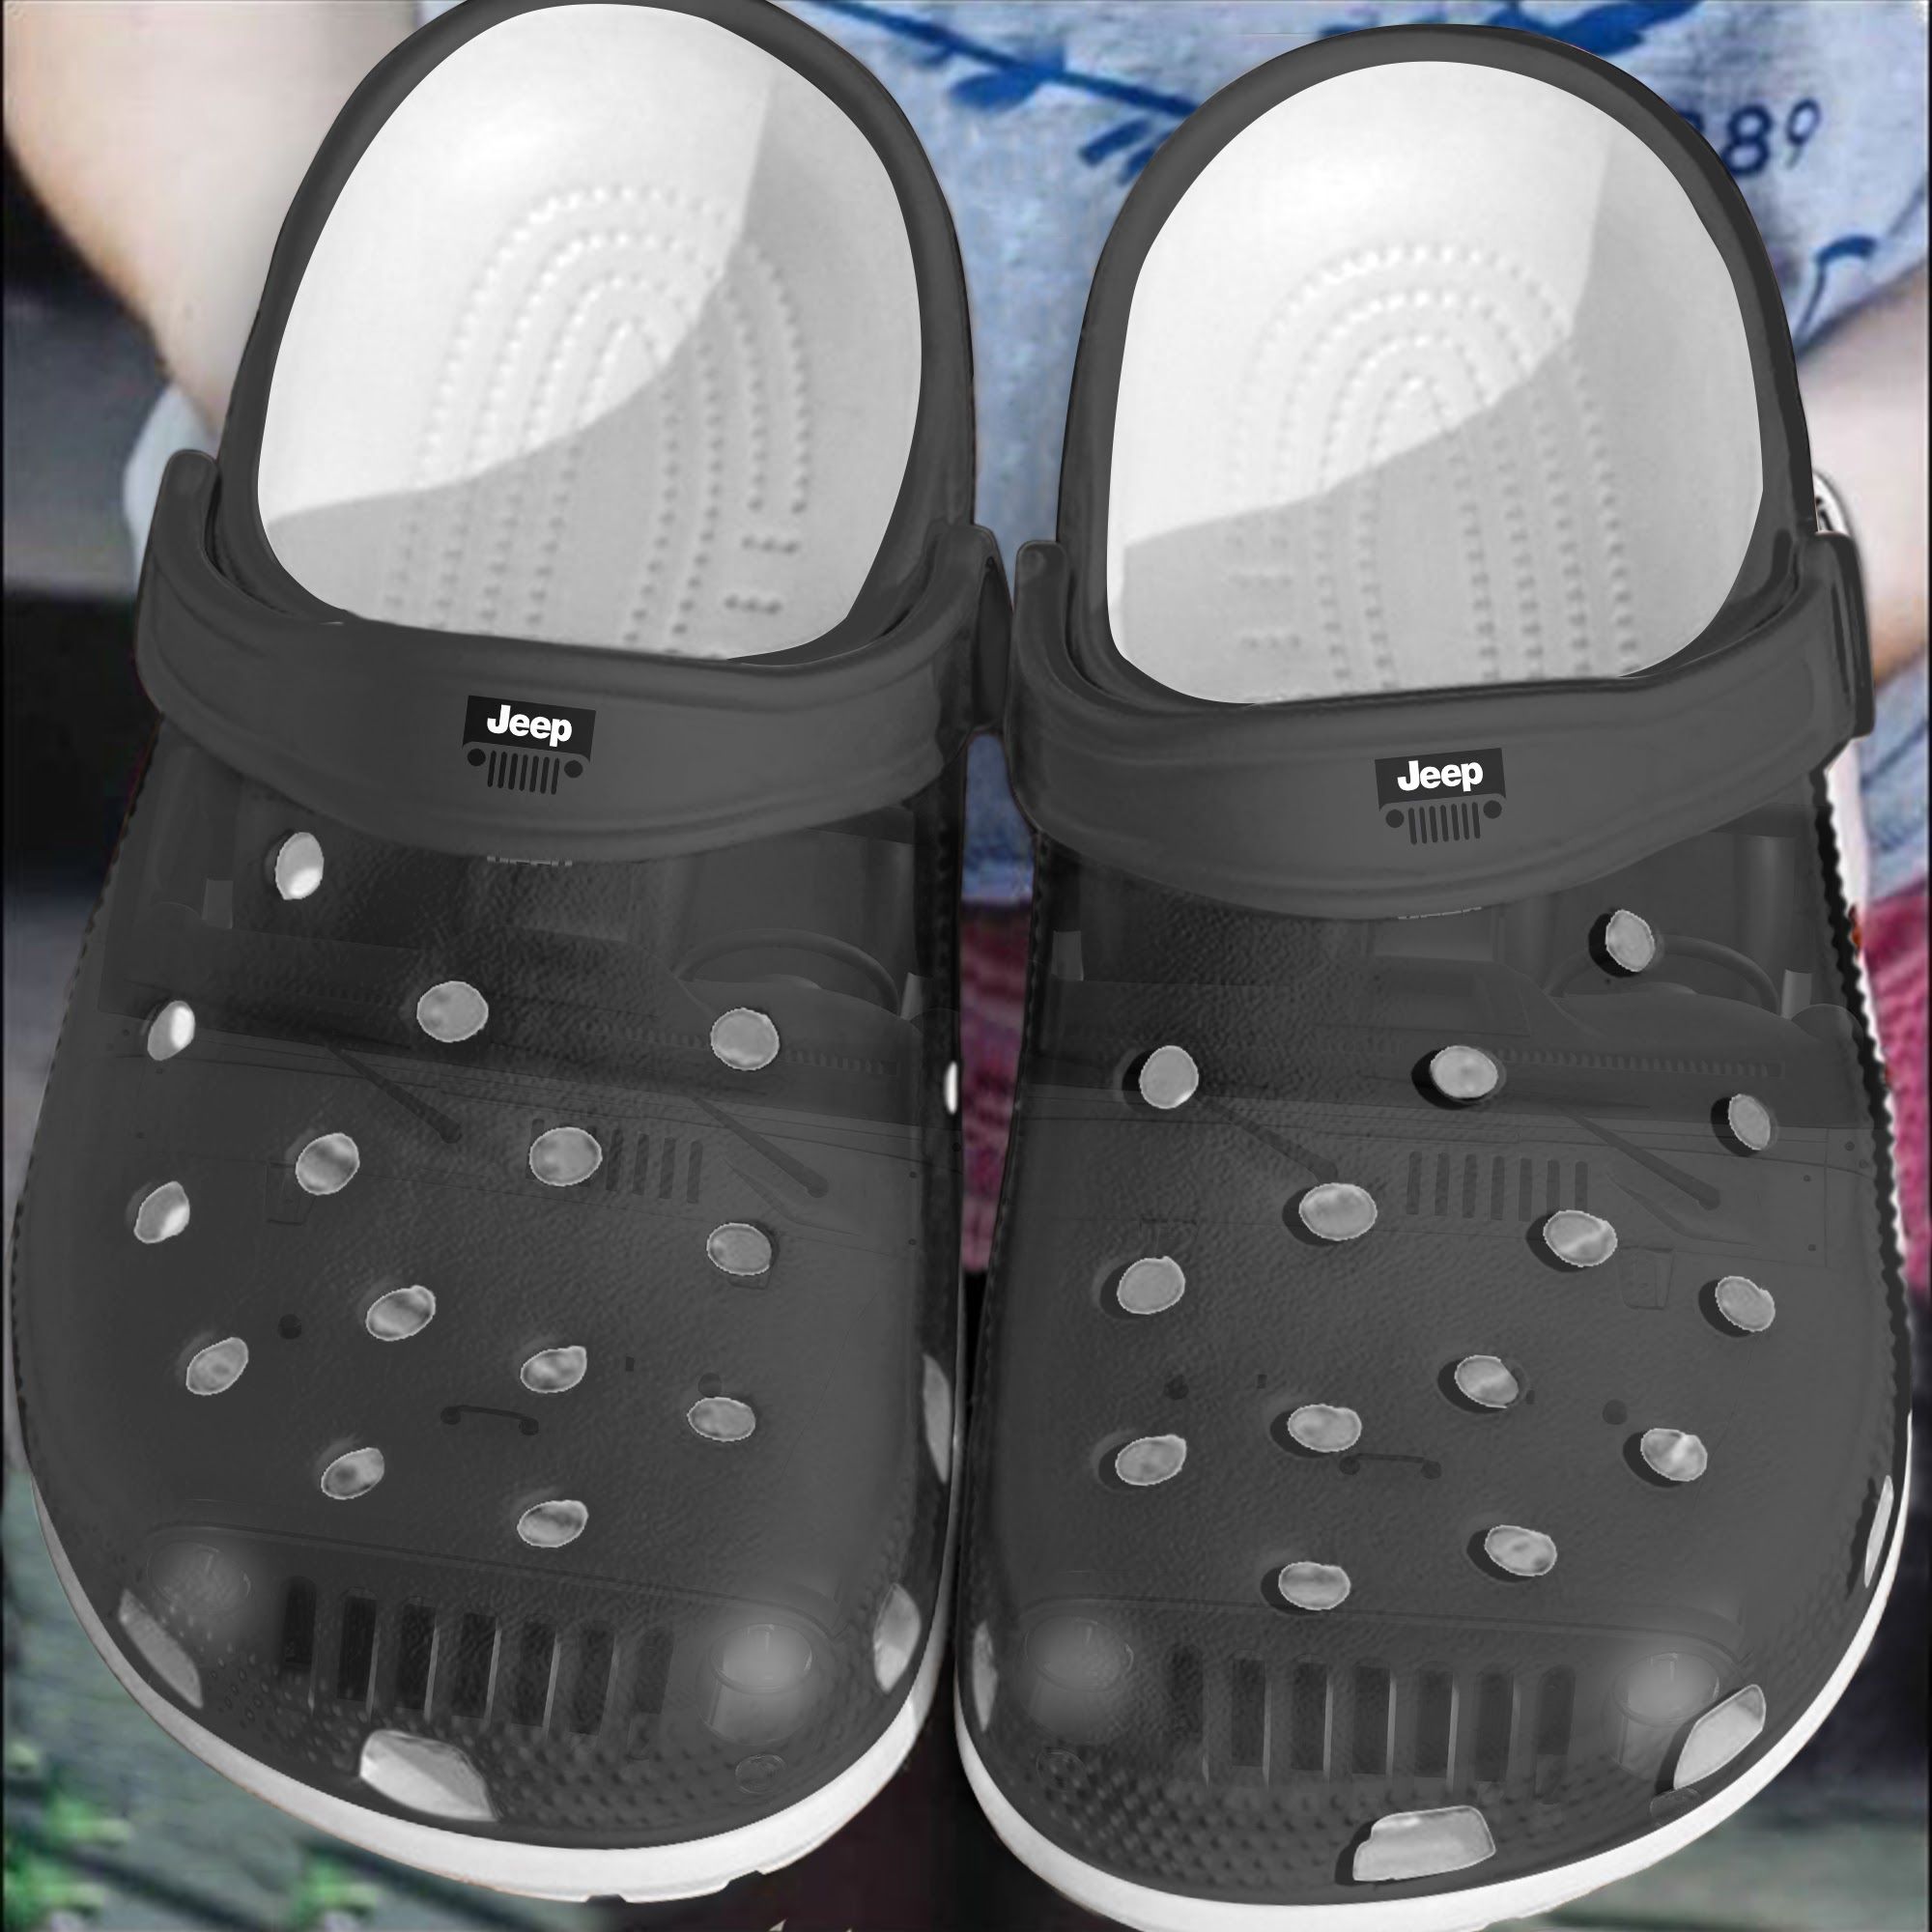 Some new Crocs shoes for you to choose from 158